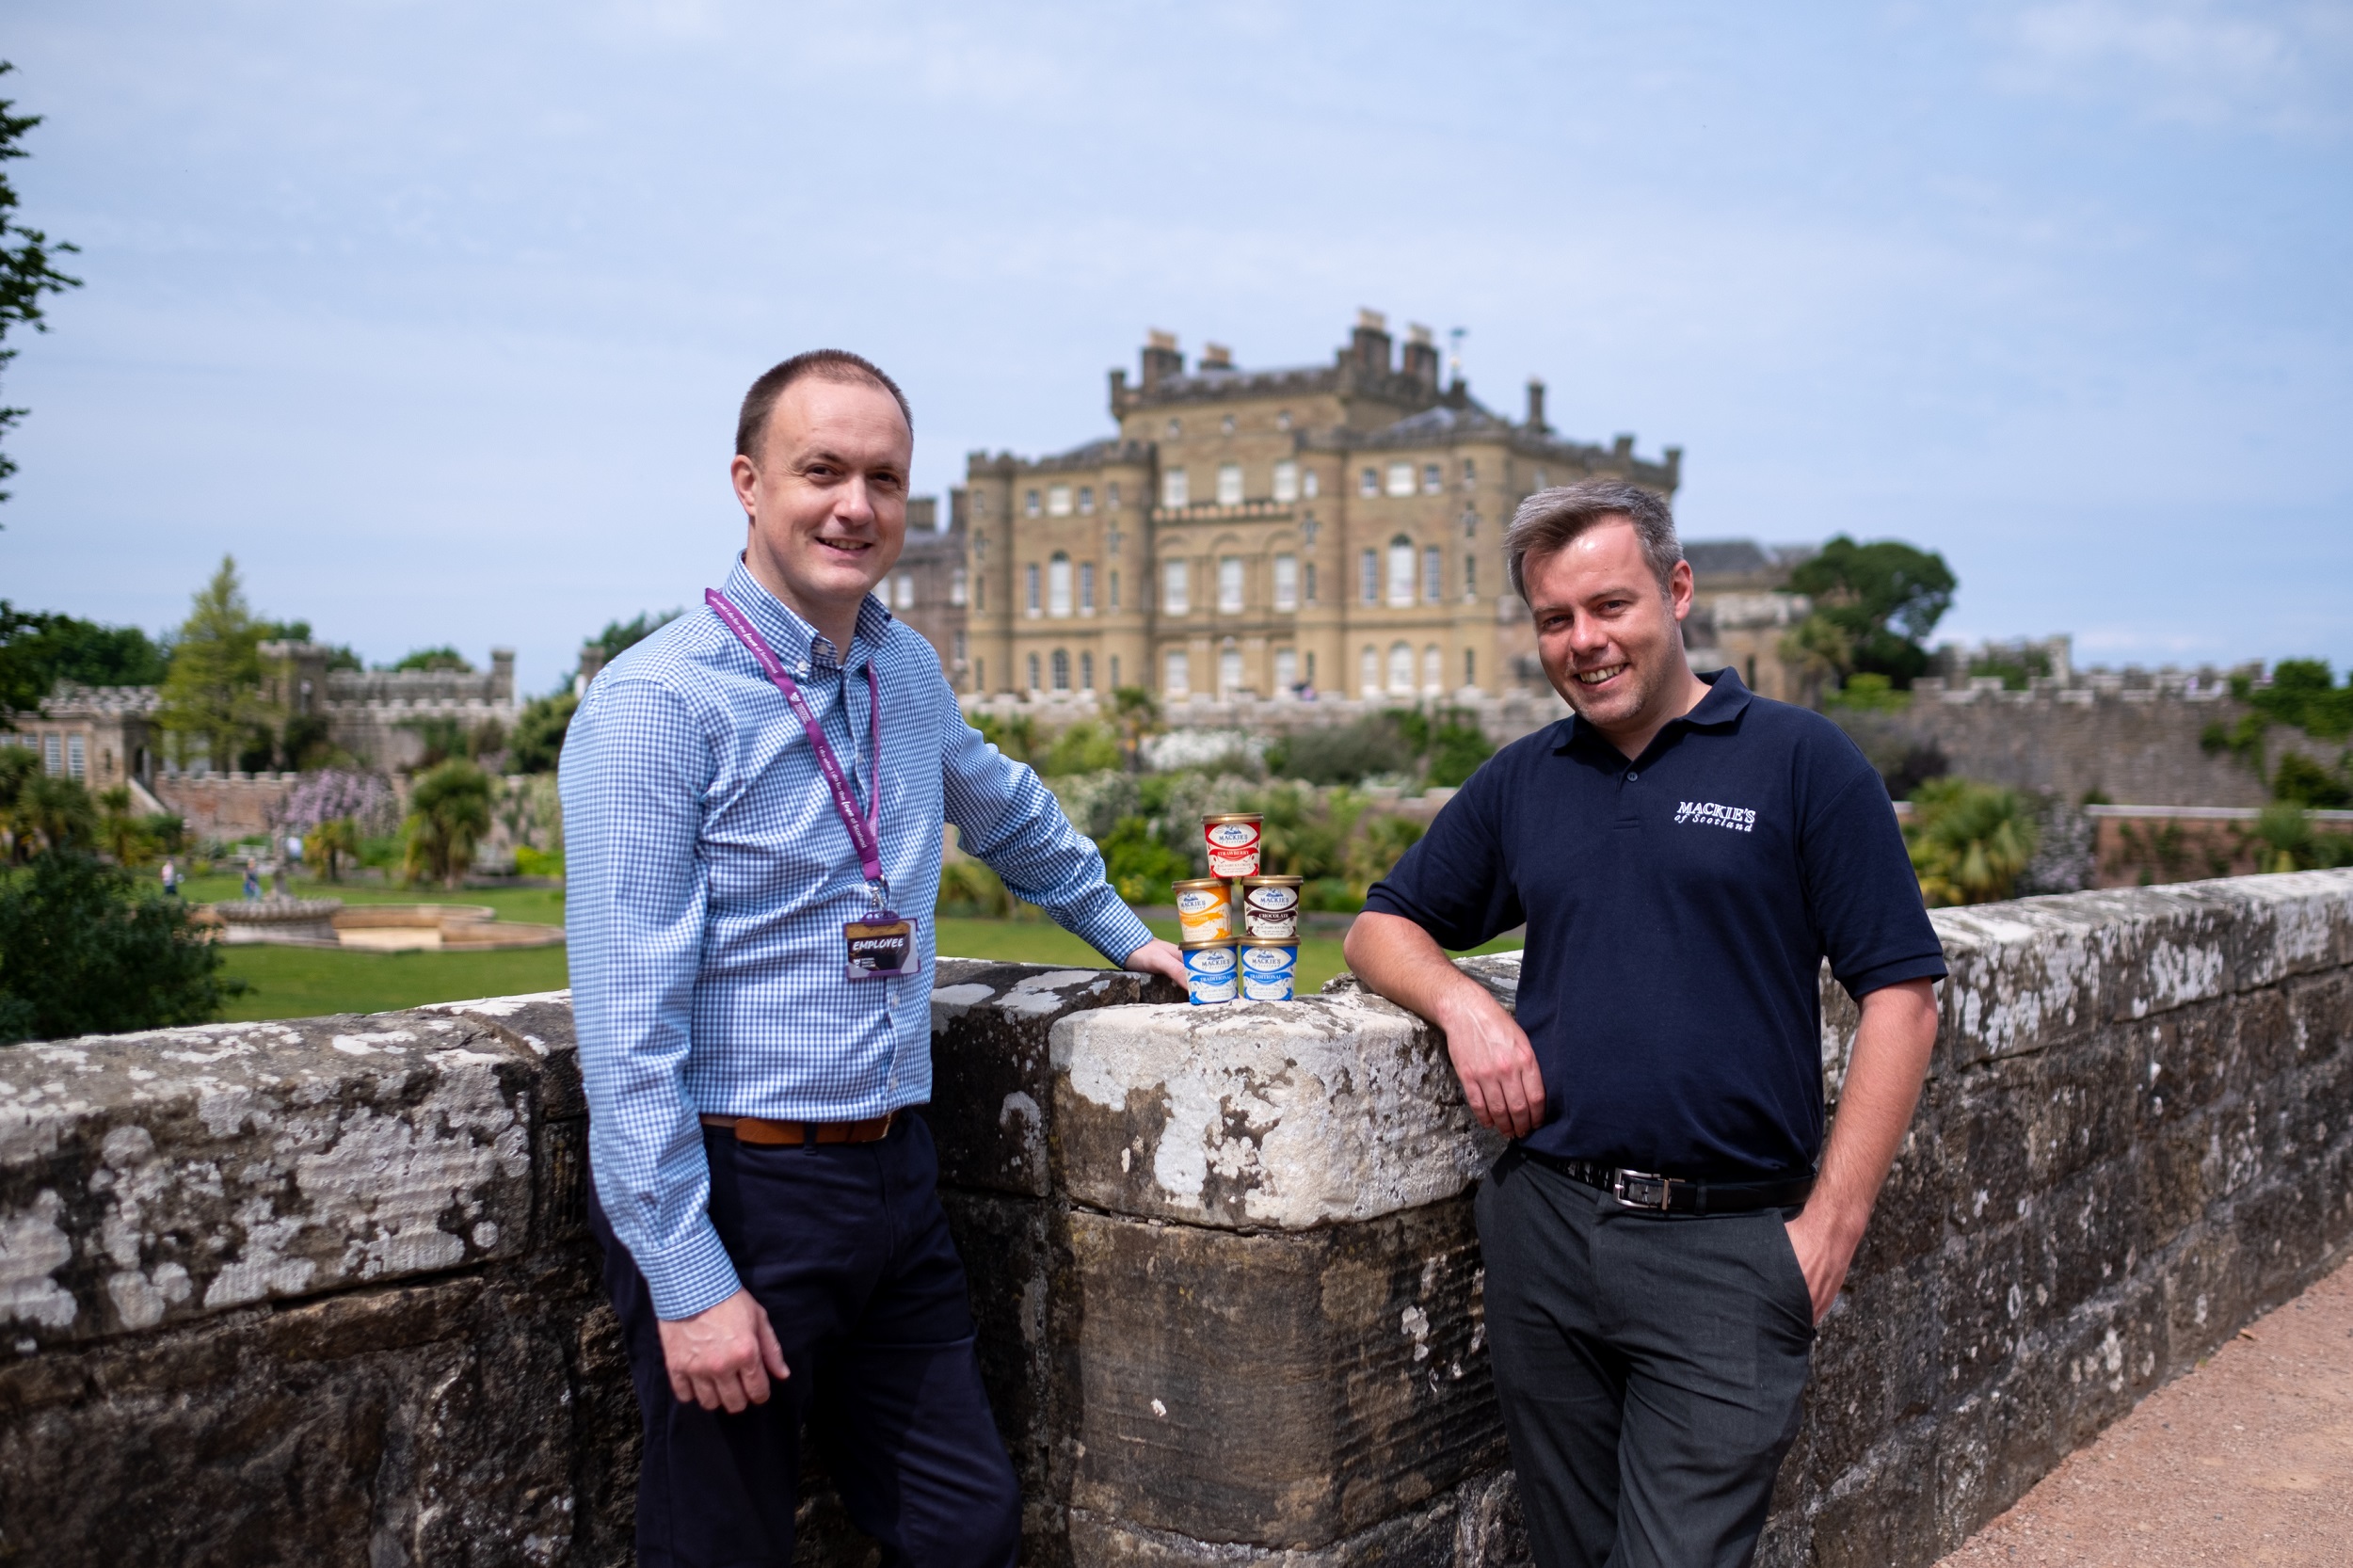 Greenshoots: Mackie's secures deal to supply National Trust for Scotland places